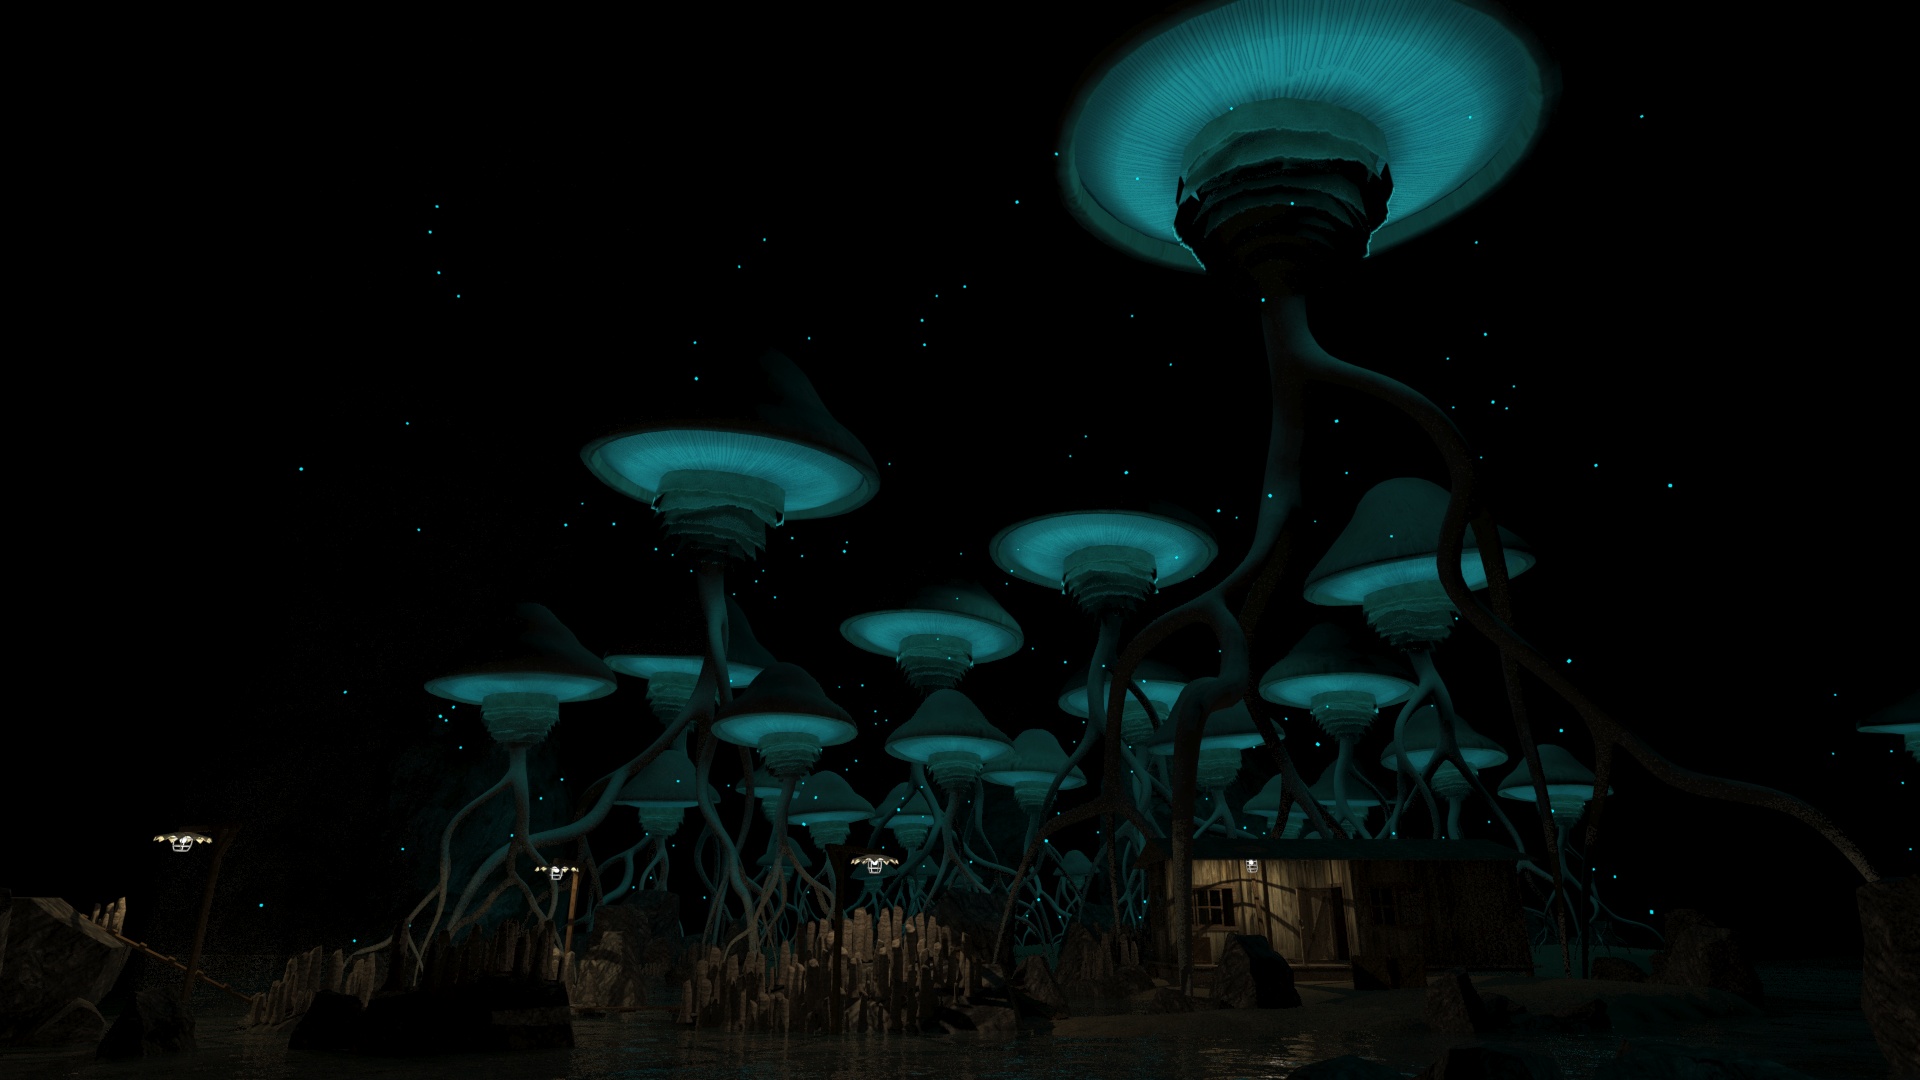 A mystical underground cave scene depicting a large bioluminescent mushroom forest with a small cabin nestled amongst its roots. The purpose of this scene was to invoke the natural human curiosity and the desire to explore in a peaceful environment.